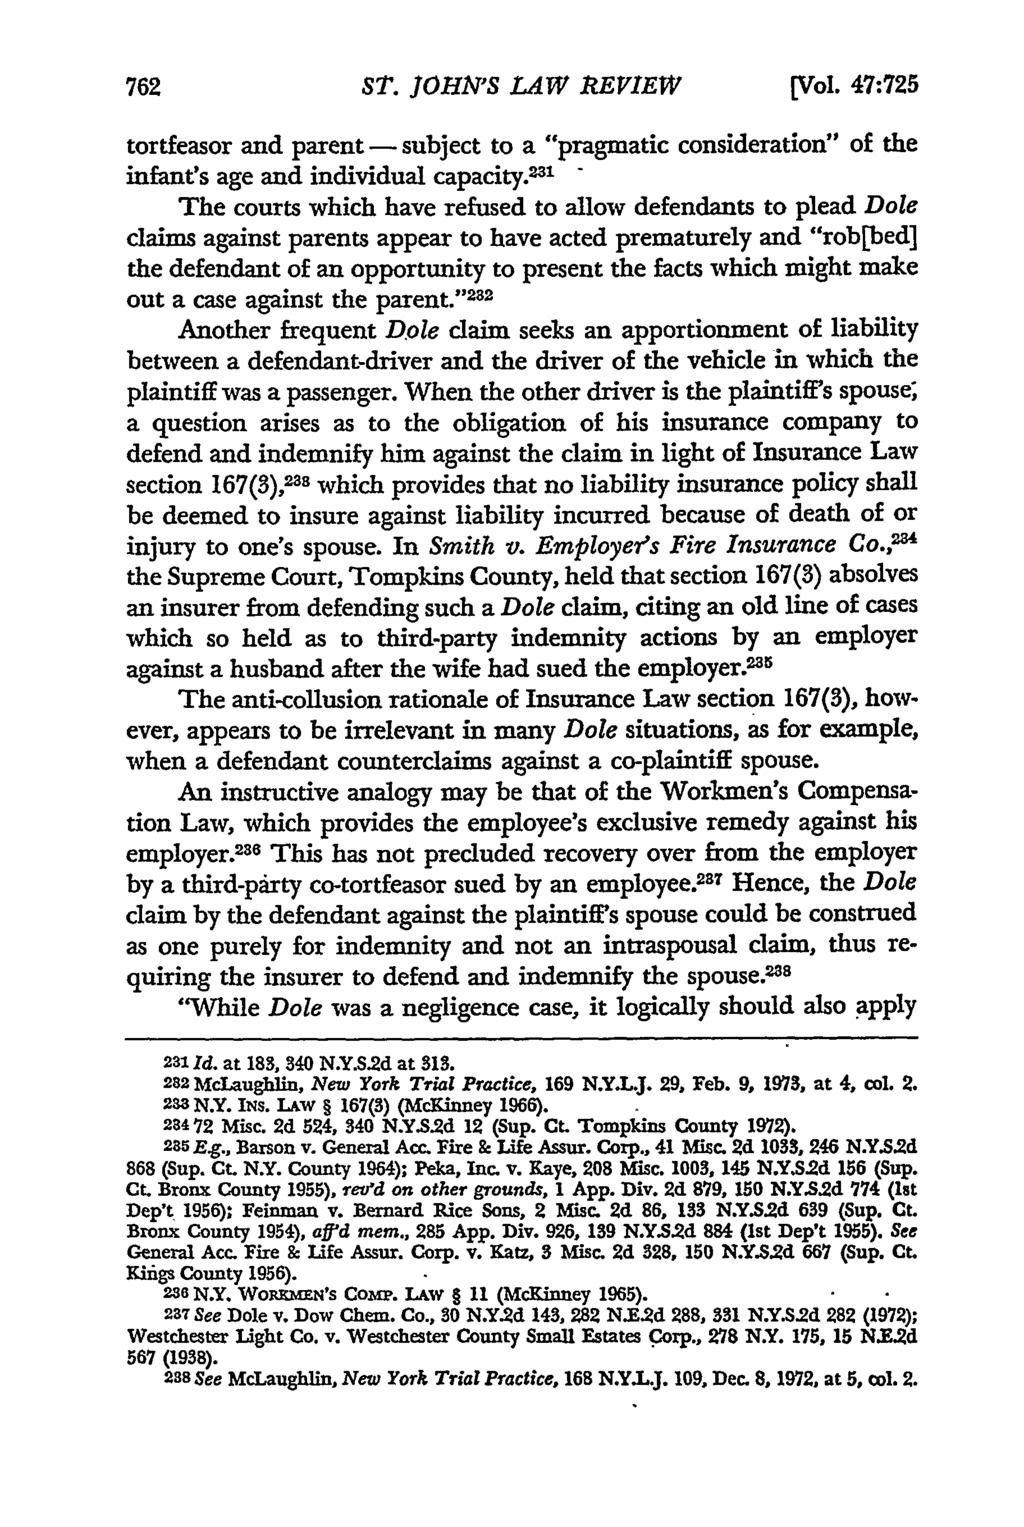 ST. JOHNS LAW REVIEW [VoI. 47:725 tortfeasor and parent -subject to a "pragmatic consideration" of the infant's age and individual capacity.